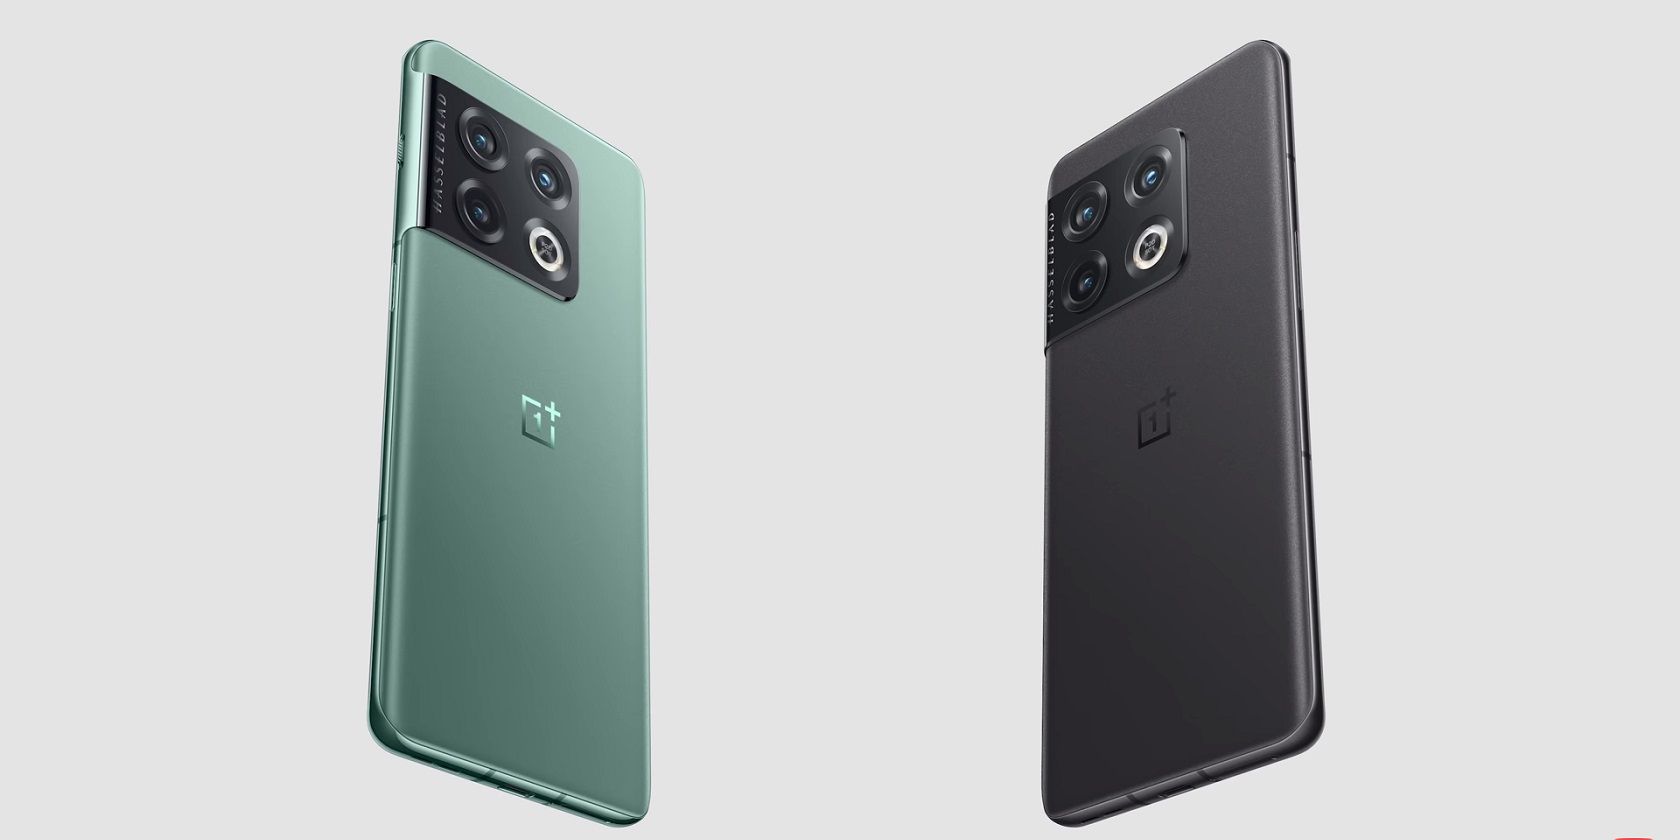 OnePlus 10 Pro color options